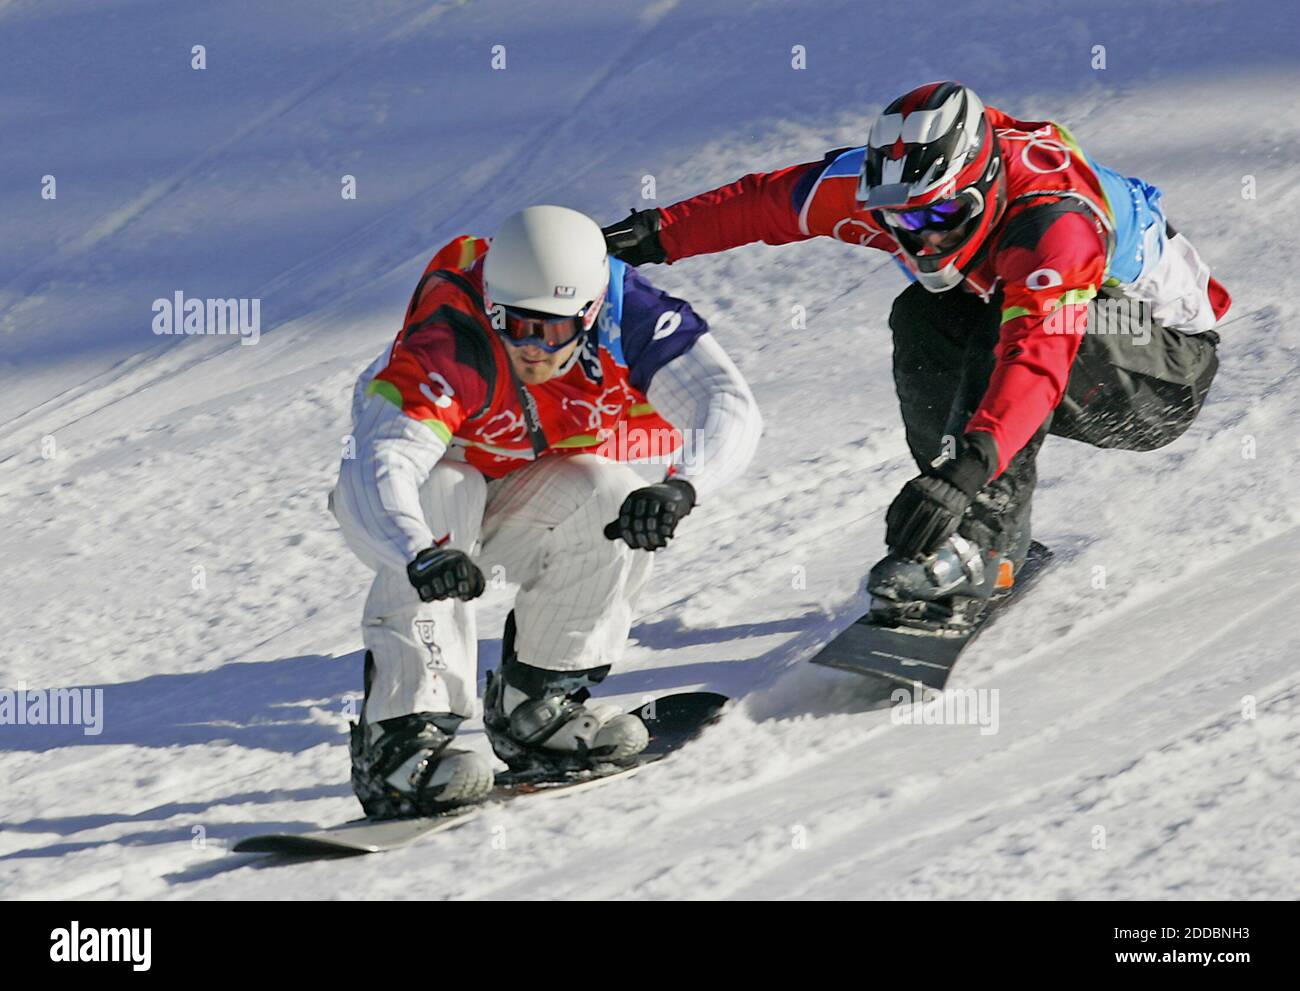 NO FILM, NO VIDEO, NO TV, NO DOCUMENTARY - Seth Wescott of the United States, left, nears the finish line for the first ever gold medal in snowboard-cross in Bardonecchia, at right is Radoslav Zidek of Slovakia who took the sliver, at the XX Winter Olympic Games in Turin, Italy on February 16, 2006. Photo by Joe Rimkus Jr./Miami Herald/ KRT/Cameleon/ABACAPRESS.COM Stock Photo